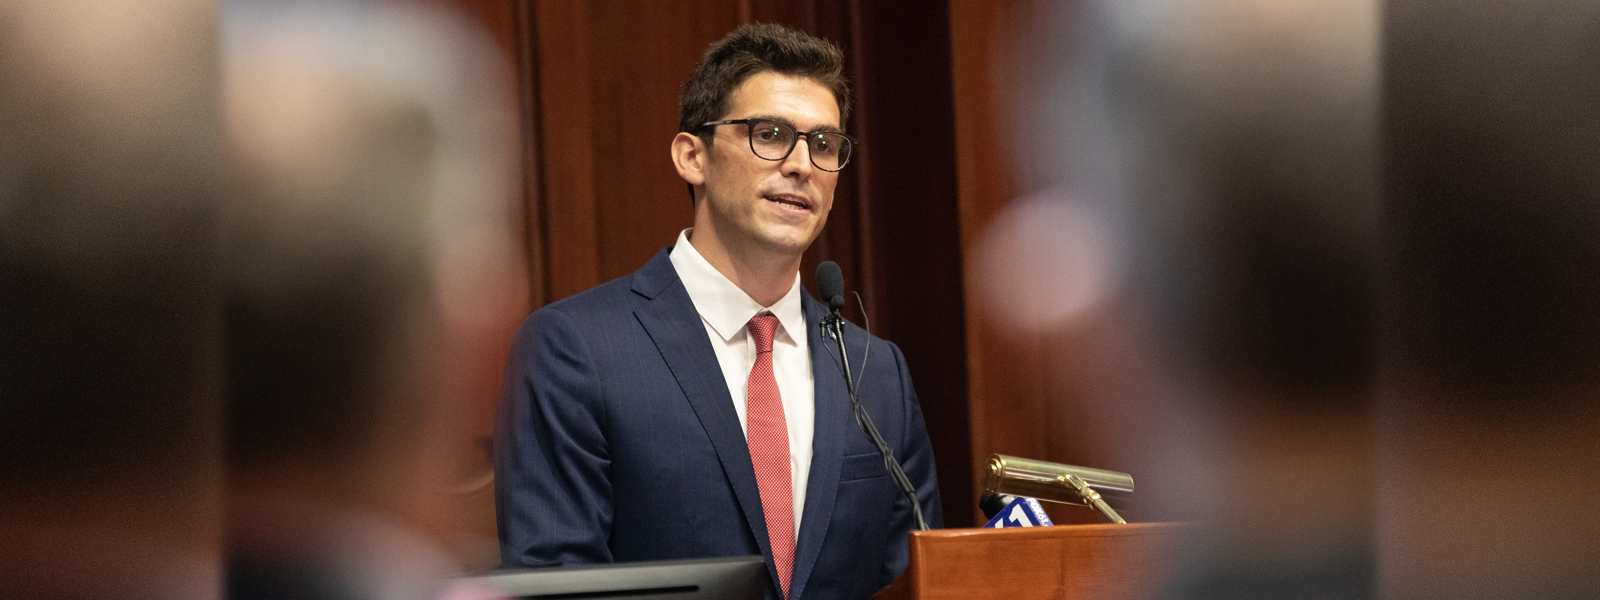 Senator Fazio Demands for More In-Person Hearings as  DOT Proposes Fare Increases and Reduction of Services